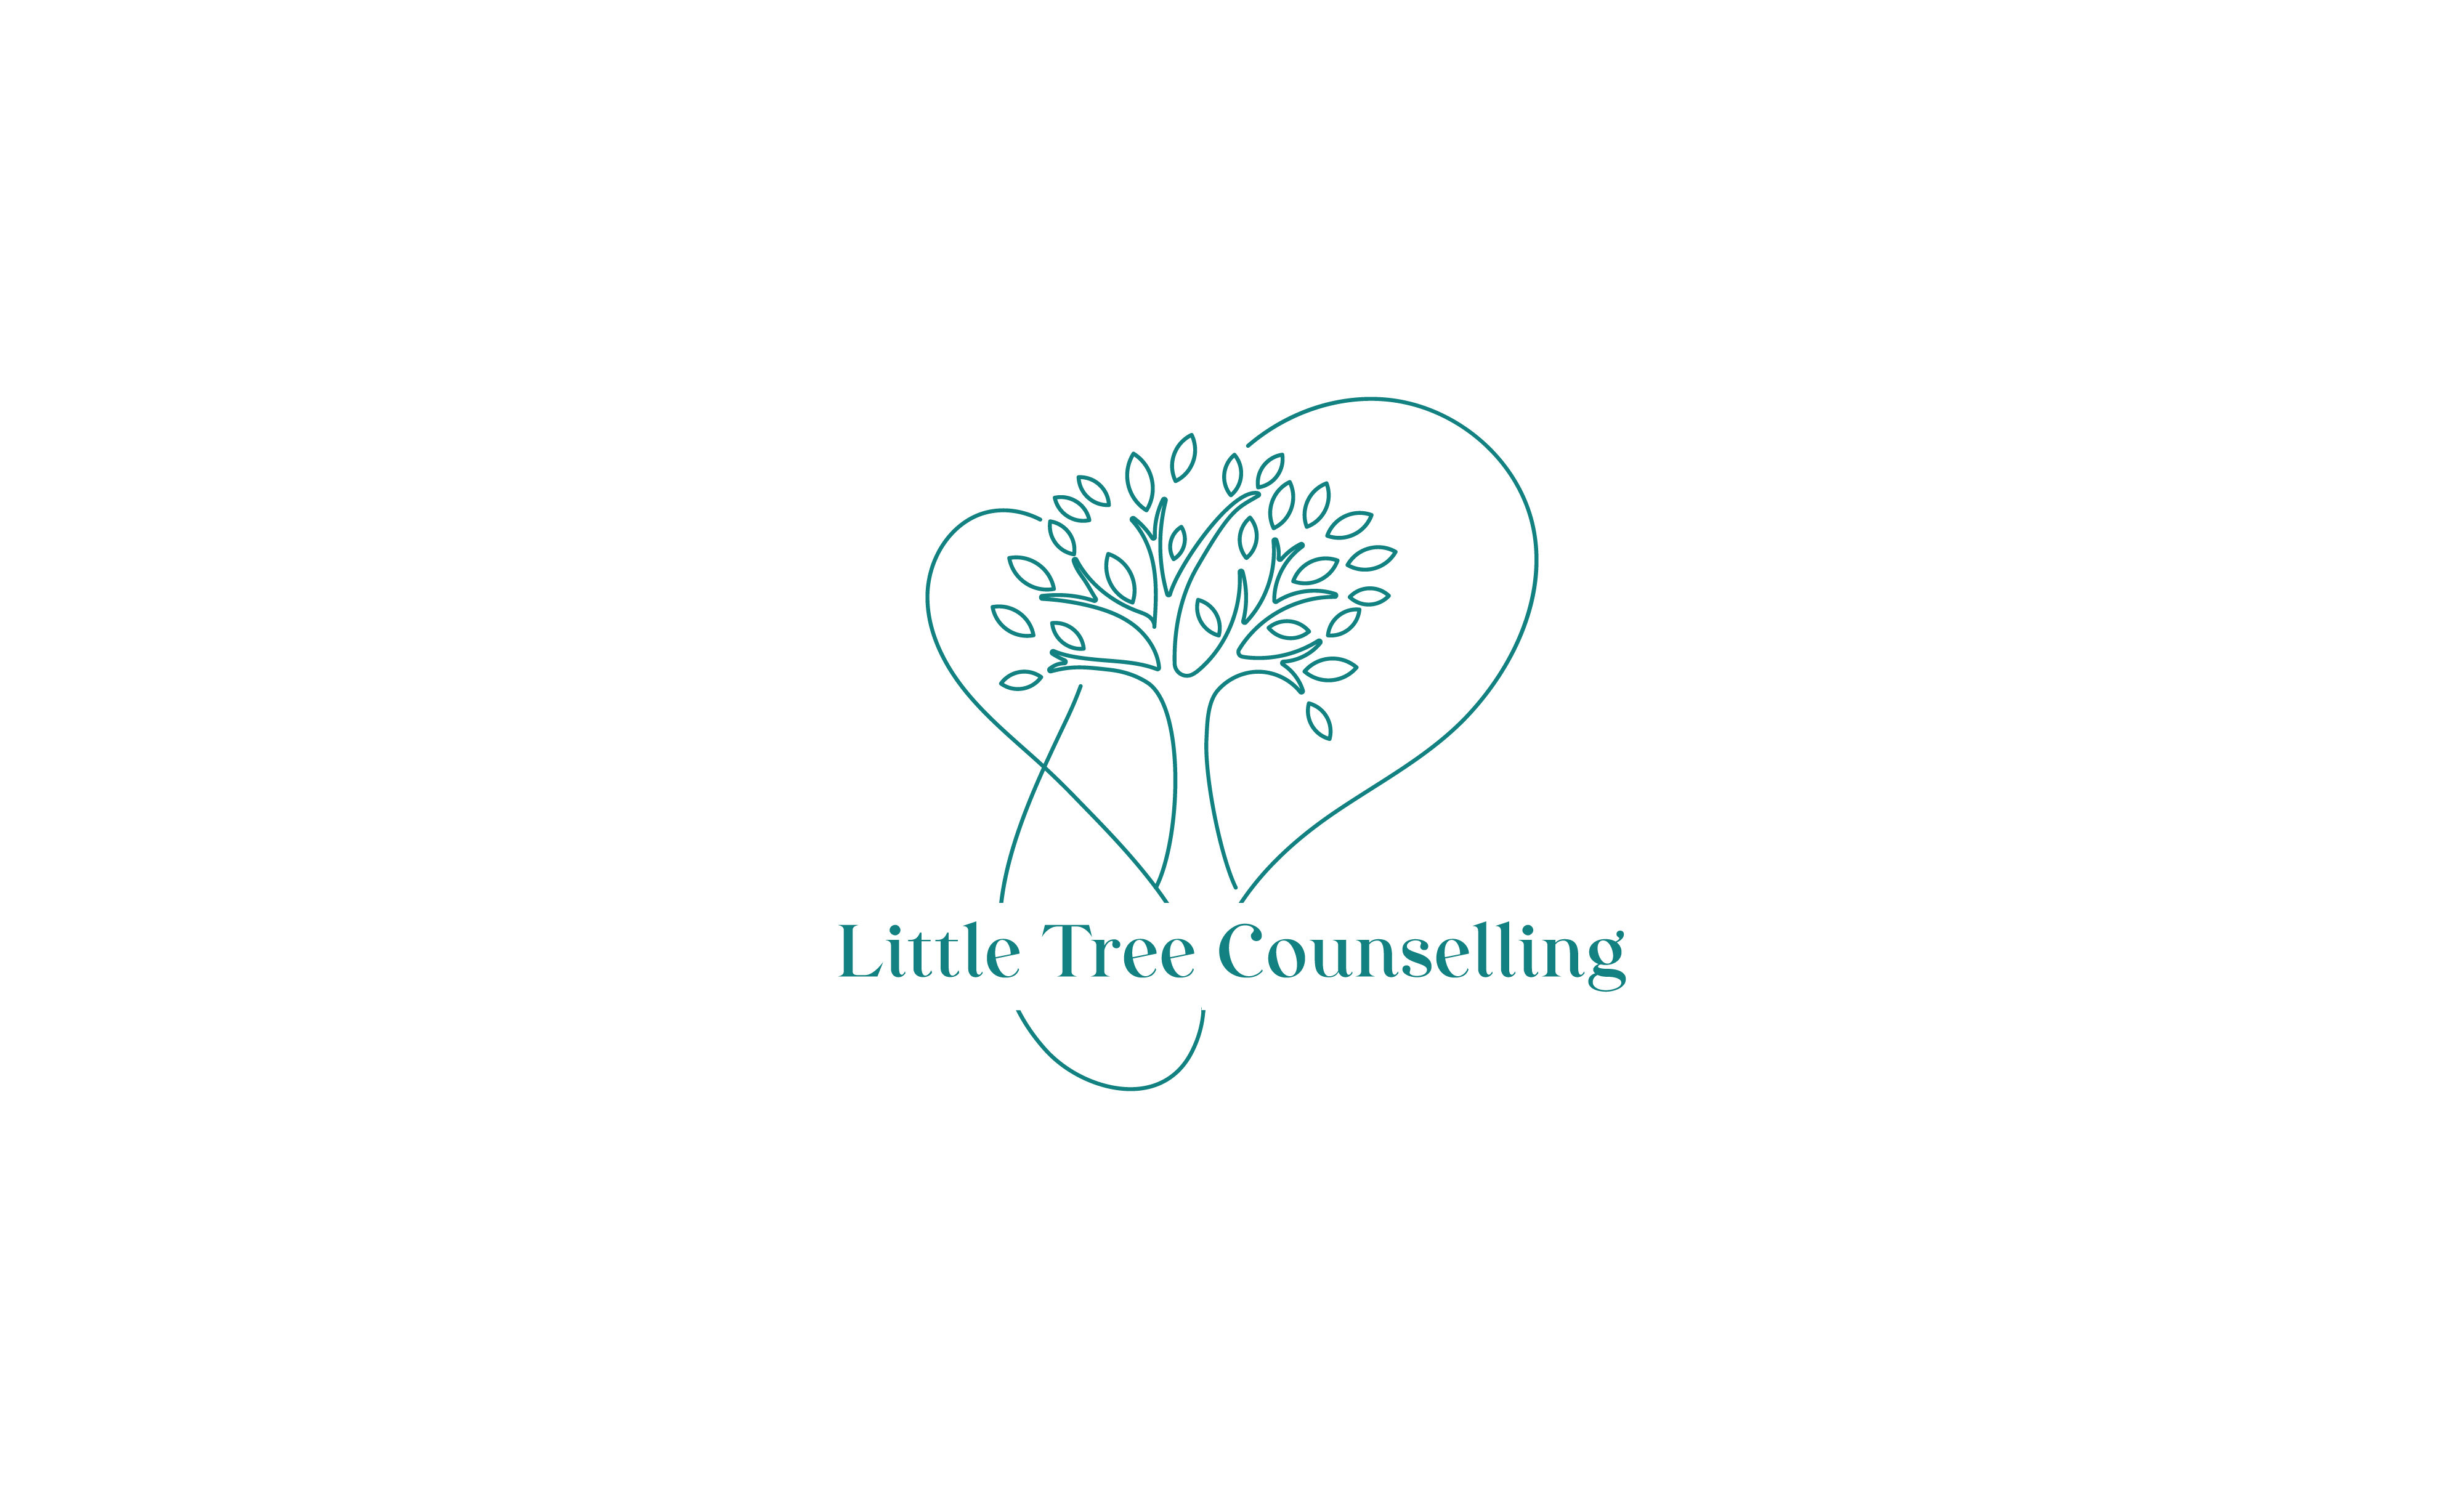 Little Tree Counselling 01